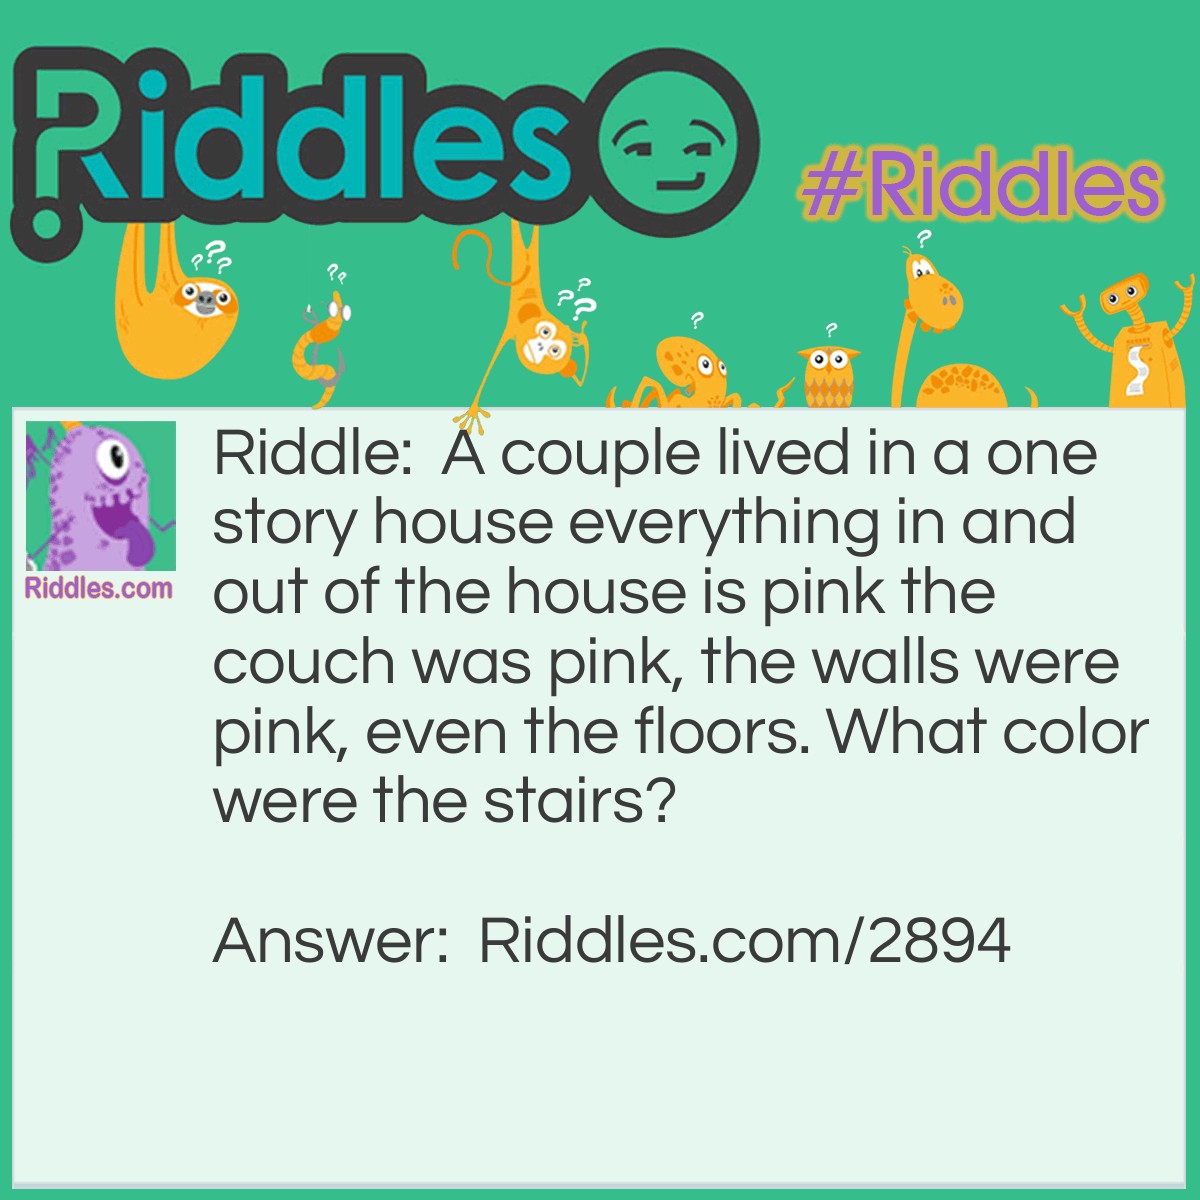 Riddle: A couple lived in a one story house everything in and out of the house is pink the couch was pink, the walls were pink, even the floors. What color were the stairs? Answer: They lived in a one story house... They had no stairs!!